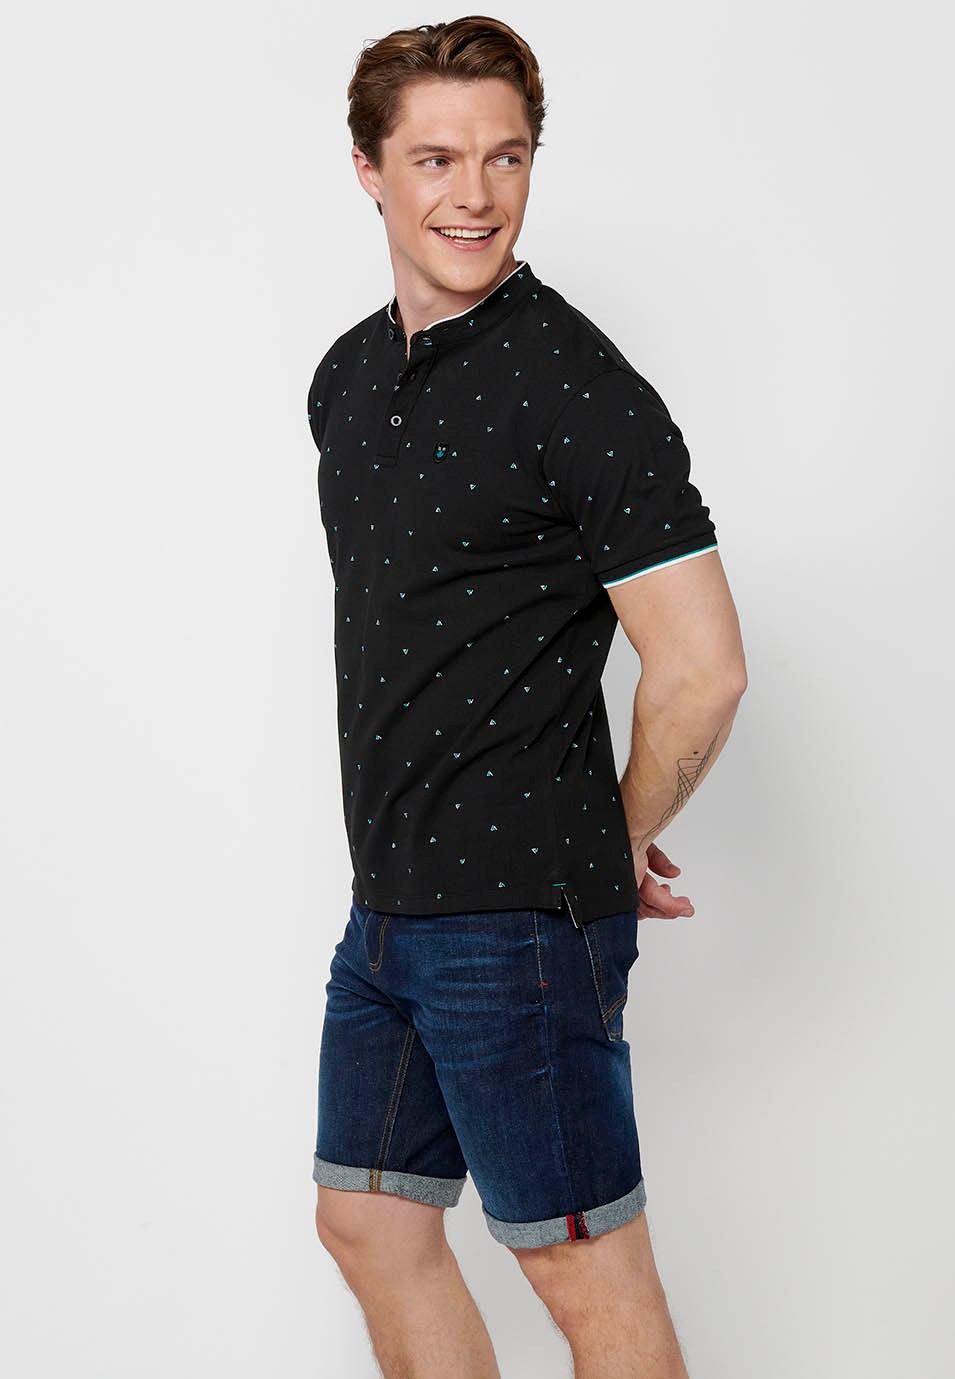 Short-sleeved Cotton Polo with Round Neck with buttoned opening and Finished with Side Cuts in Black for Men 6